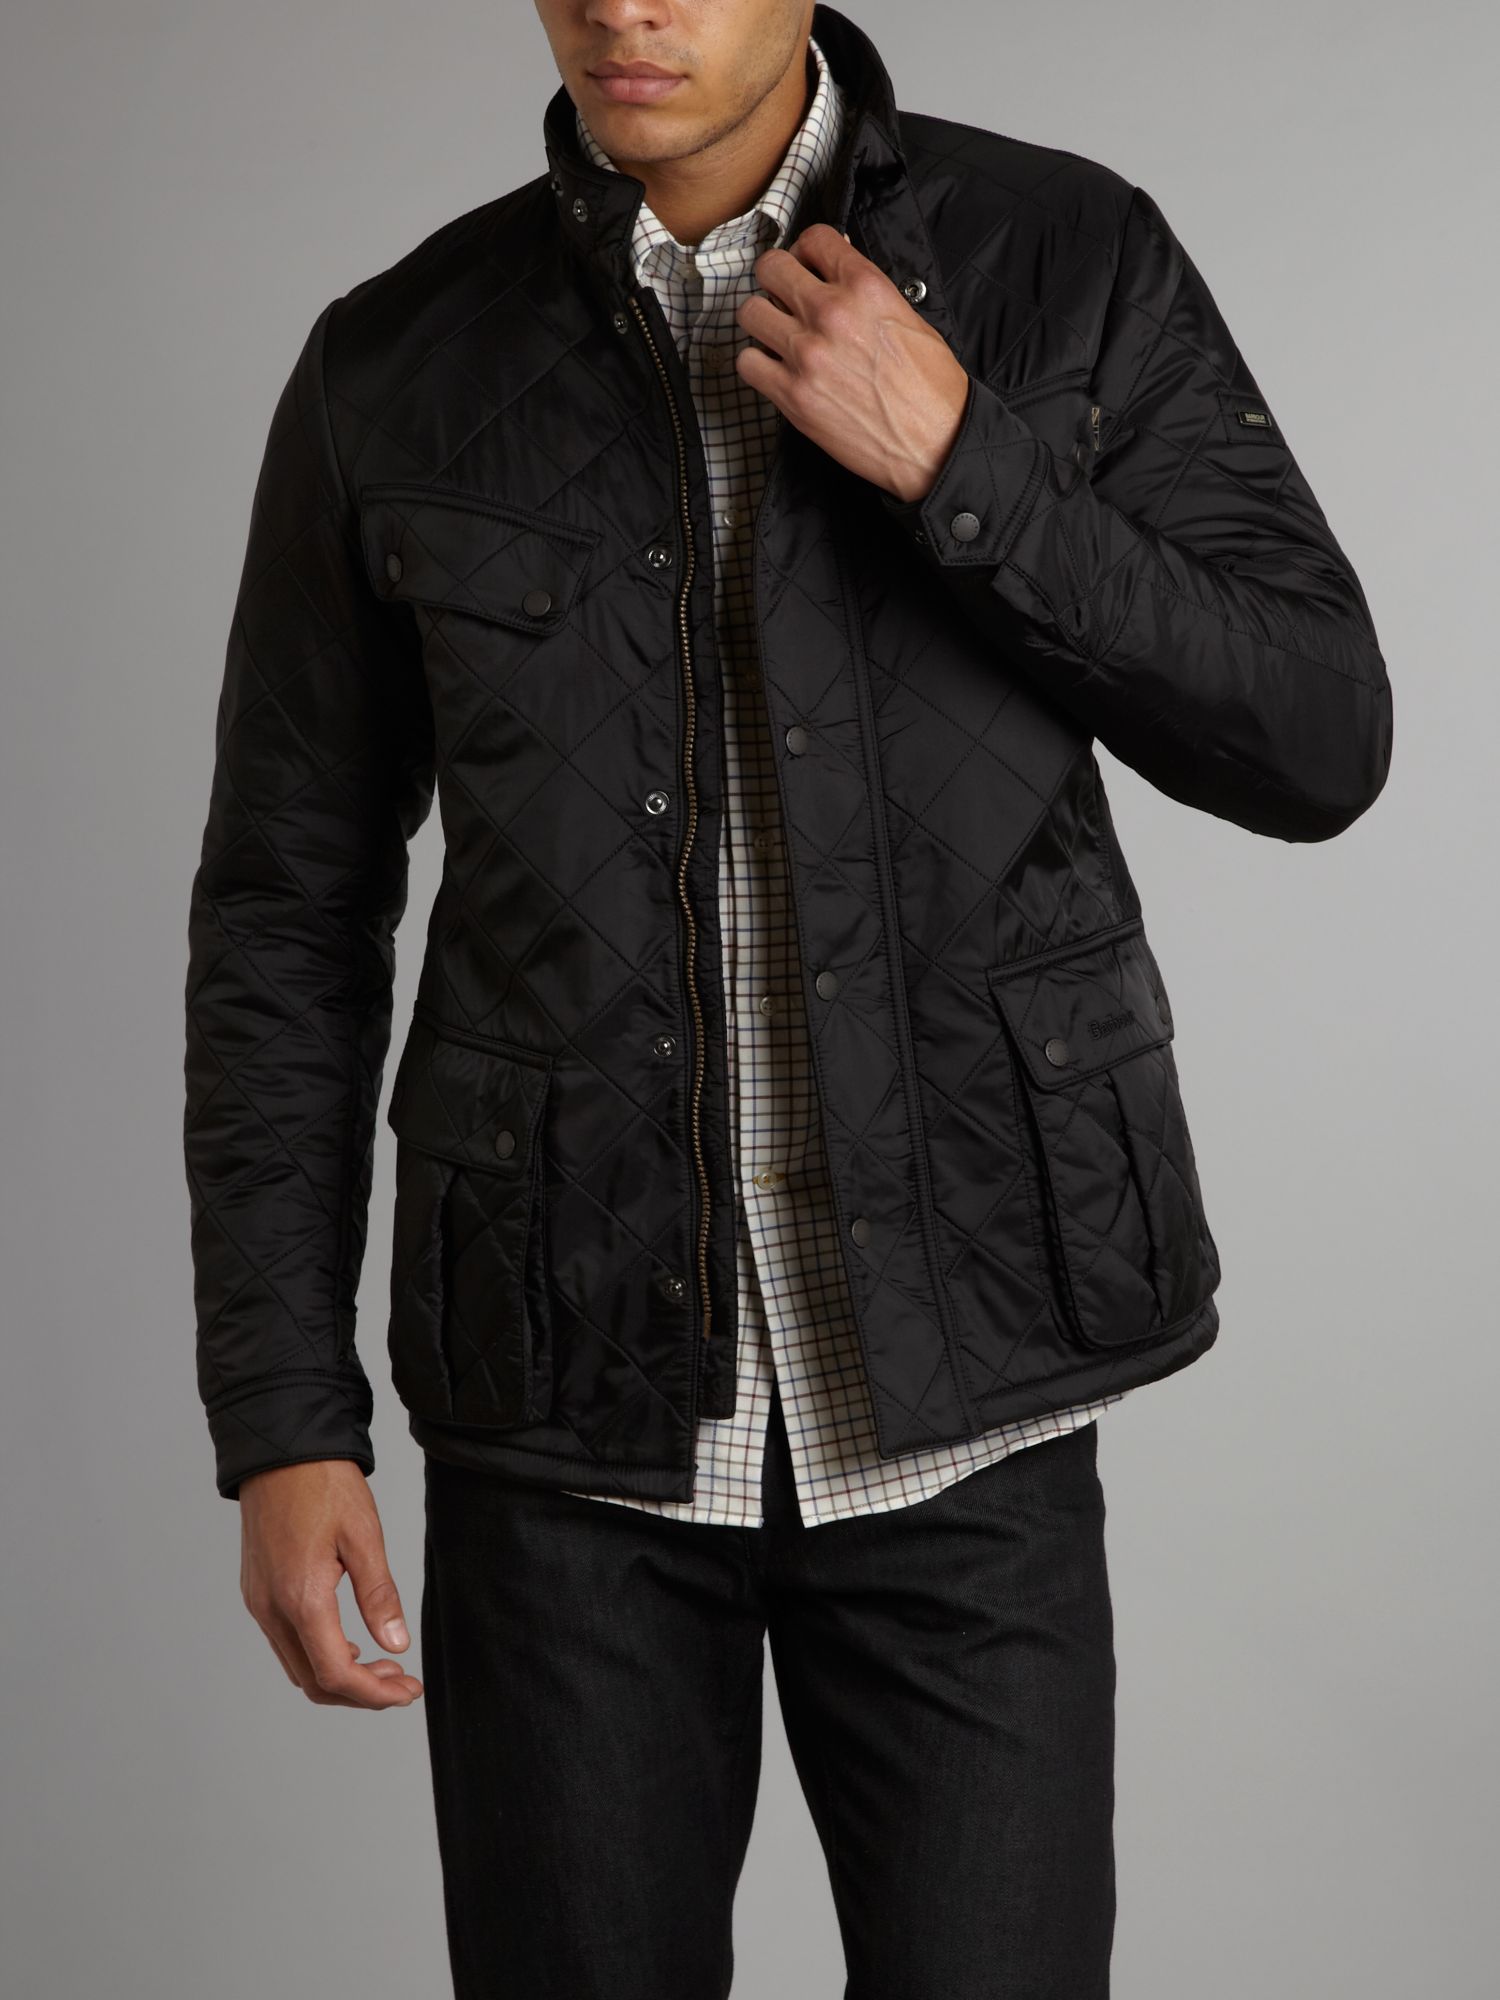 barbour international quilted jacket mens | Peninsula Conflict ...